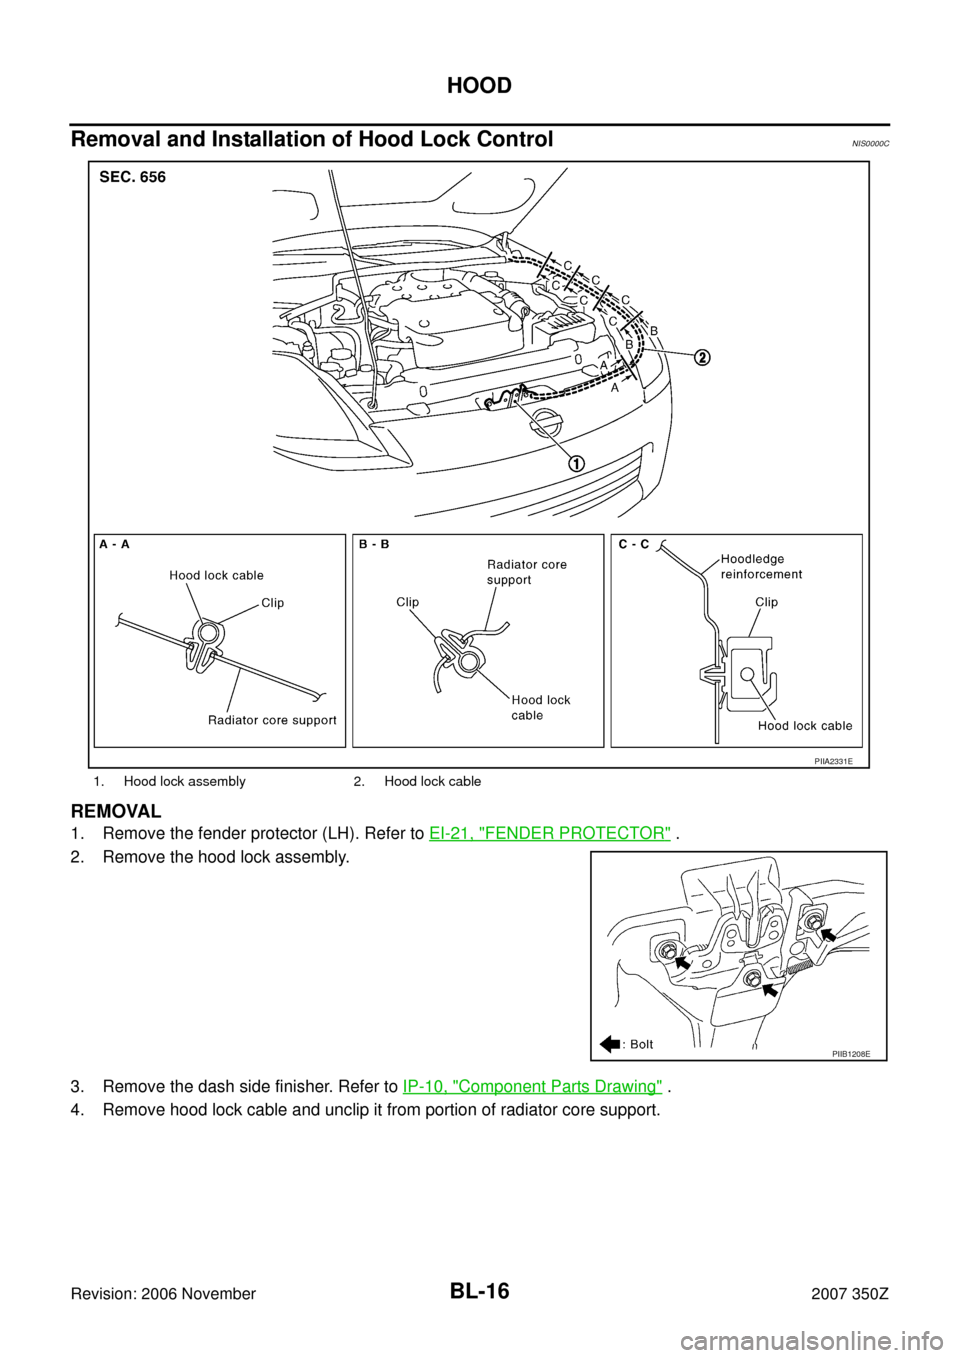 NISSAN 350Z 2007 Z33 Body, Lock And Security System Workshop Manual BL-16
HOOD
Revision: 2006 November2007 350Z
Removal and Installation of Hood Lock ControlNIS0000C
REMOVAL
1. Remove the fender protector (LH). Refer to EI-21, "FENDER PROTECTOR" .
2. Remove the hood l